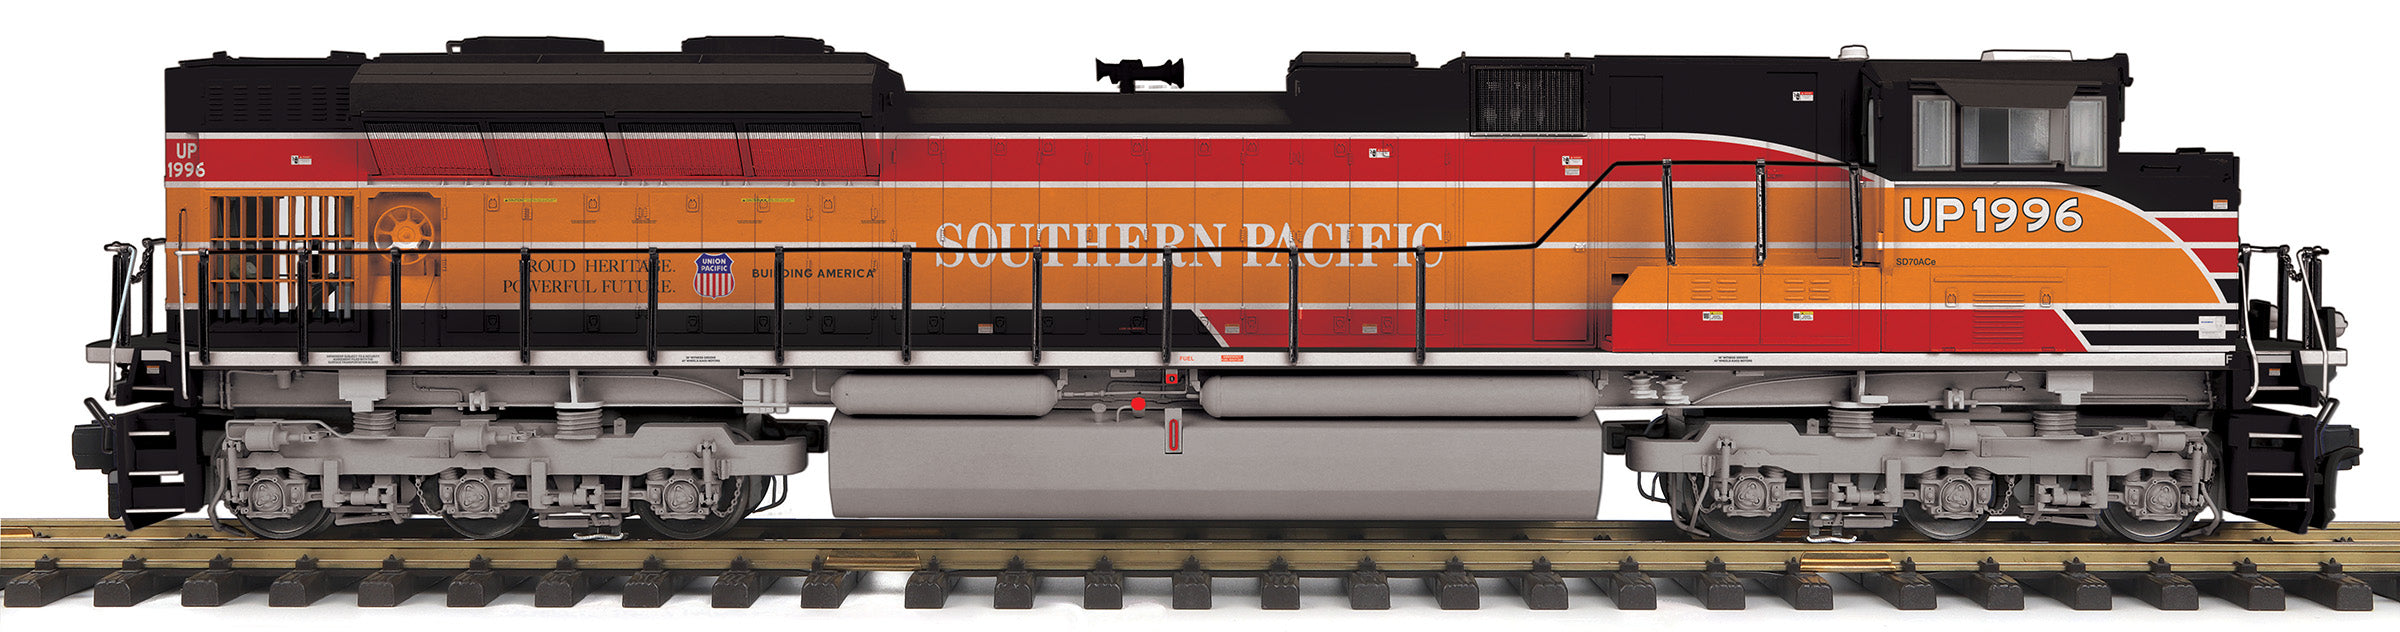 MTH G 70-2156-1 - SD70AH Diesel Engine "Southern Pacific (UP Heritage)" #1996 w/ PS3